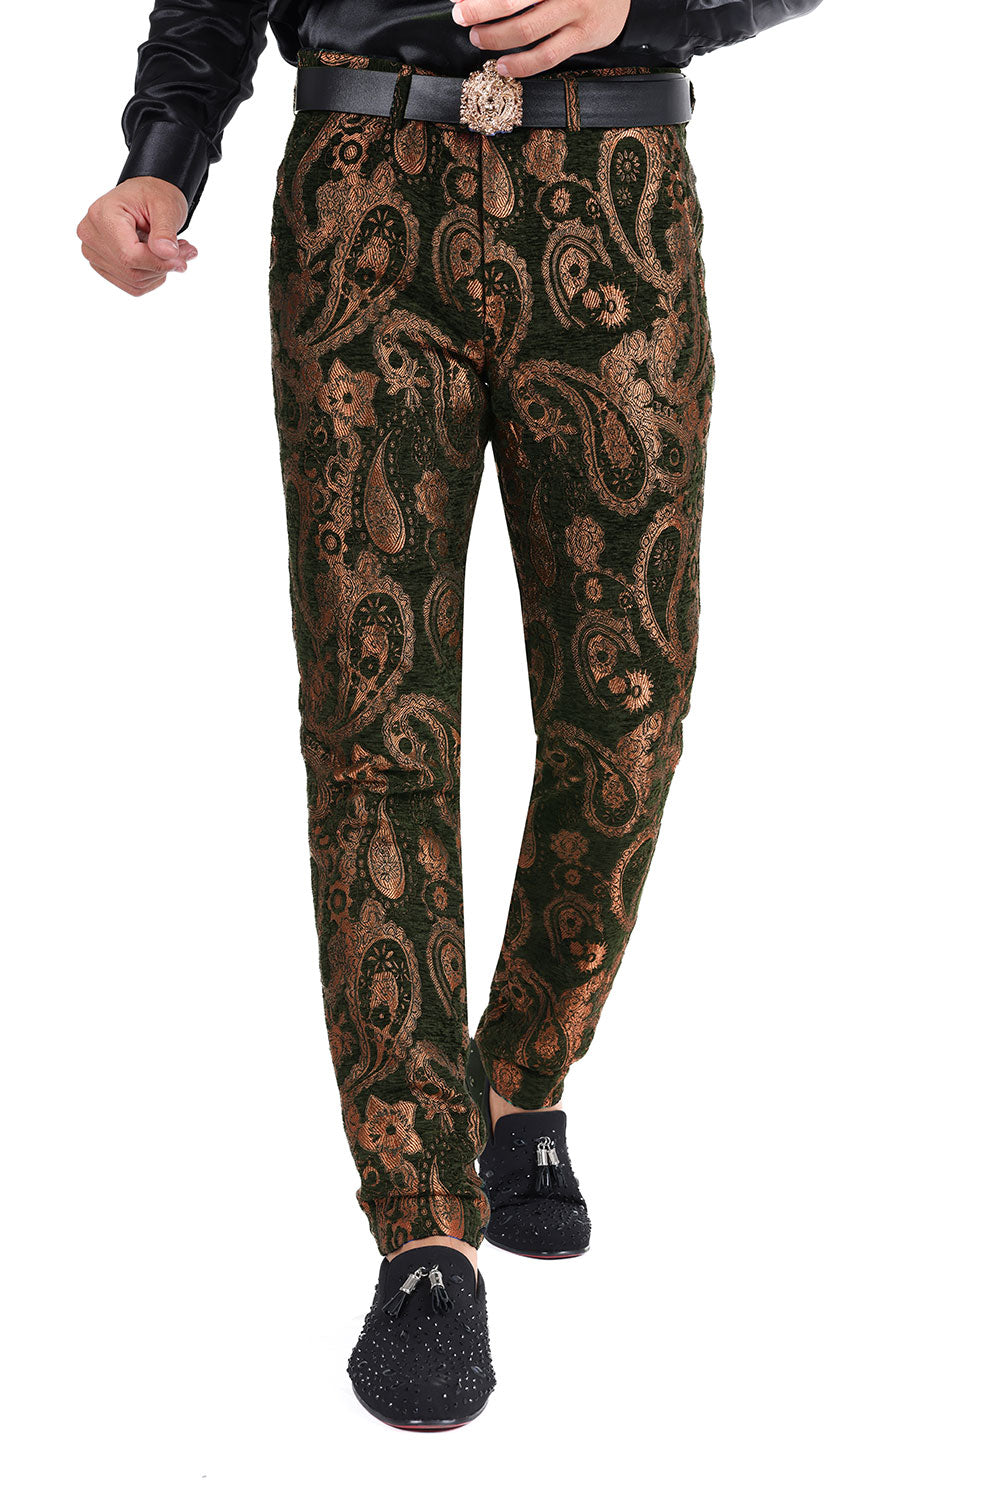 Barabas Men's Paisley Floral Print Design Luxury Pants 2CP3101 Black and Coffee